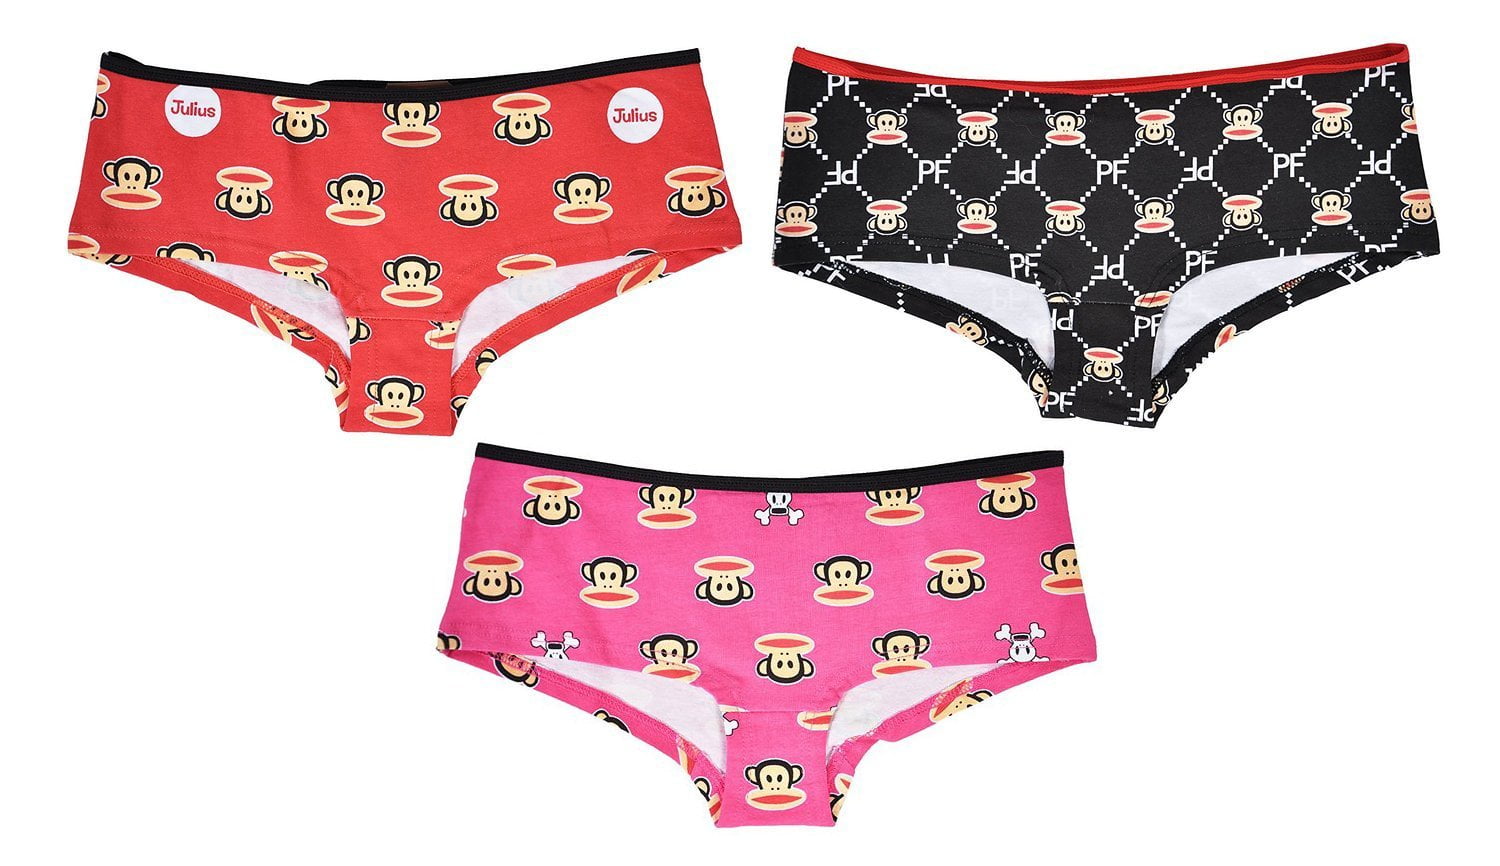 Paul Frank Womens Cheeky Allover Printed Panty